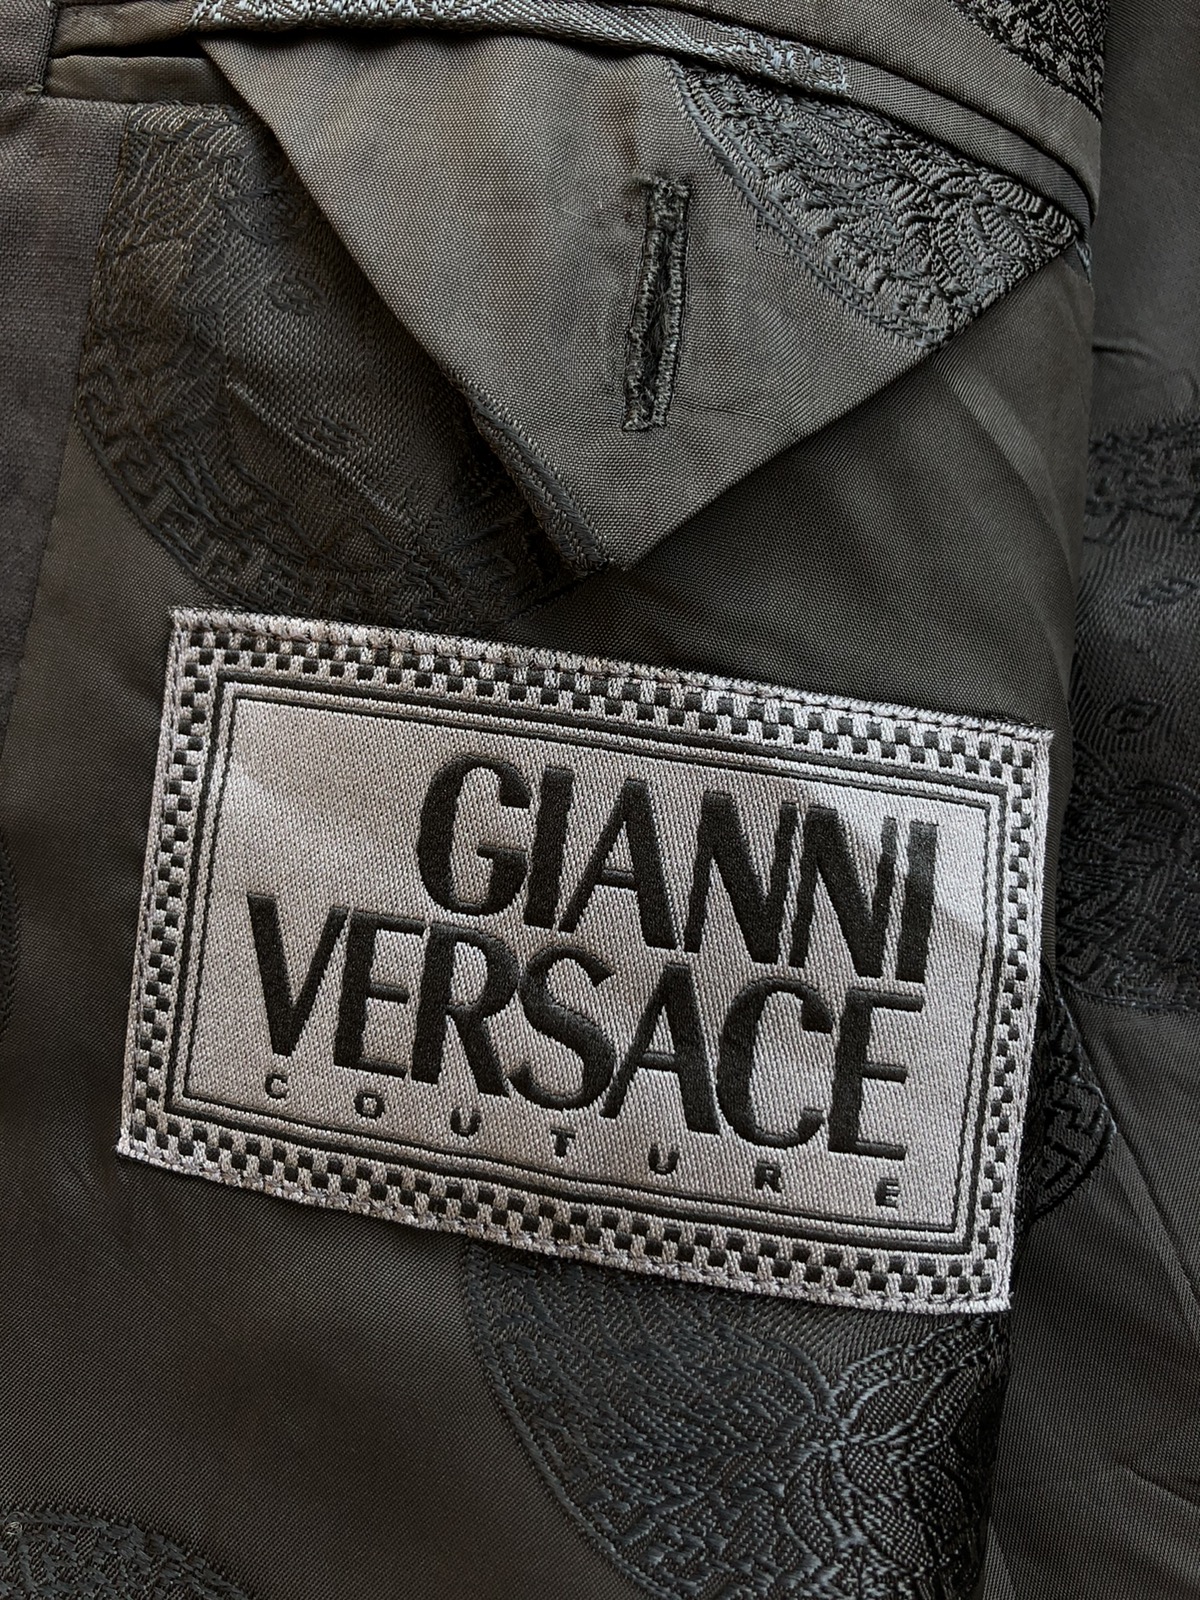 Luxury Gianni Versace Wool Coat Made in Italy - 6